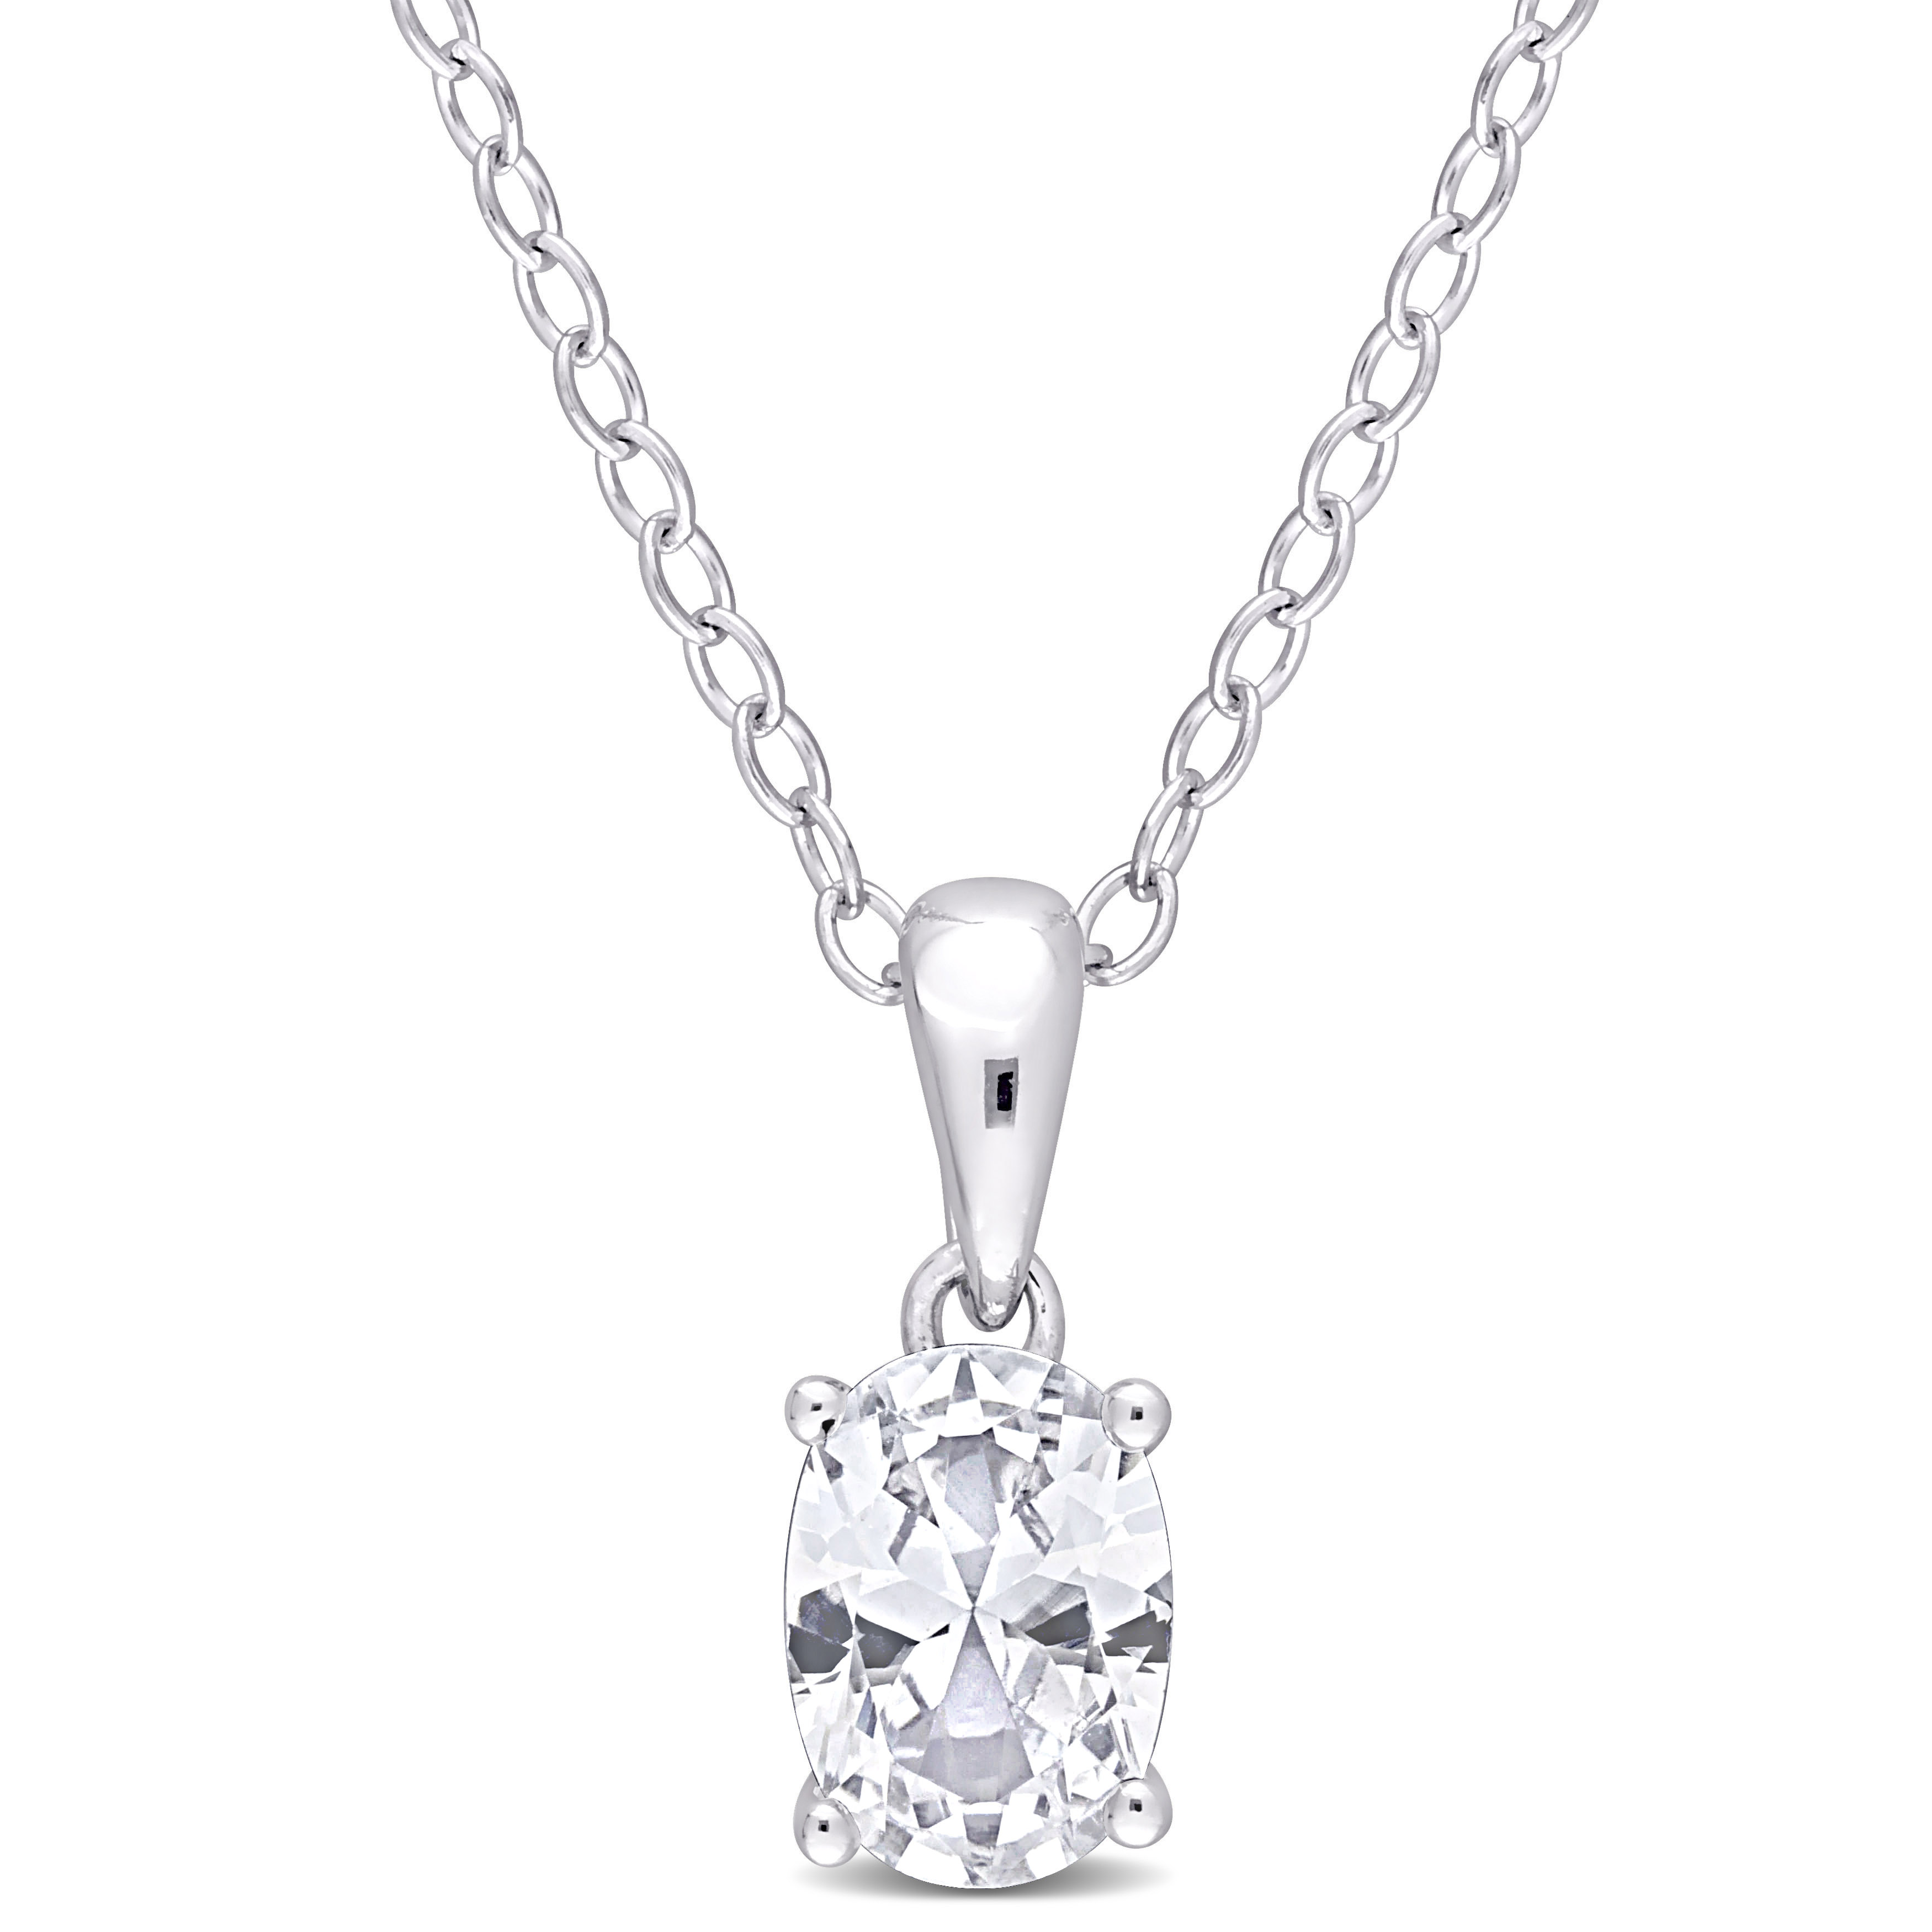 1 1/4 CT TGW Oval Created White Sapphire Solitaire Heart Design Pendant with Chain in Sterling Silver - 18 in.